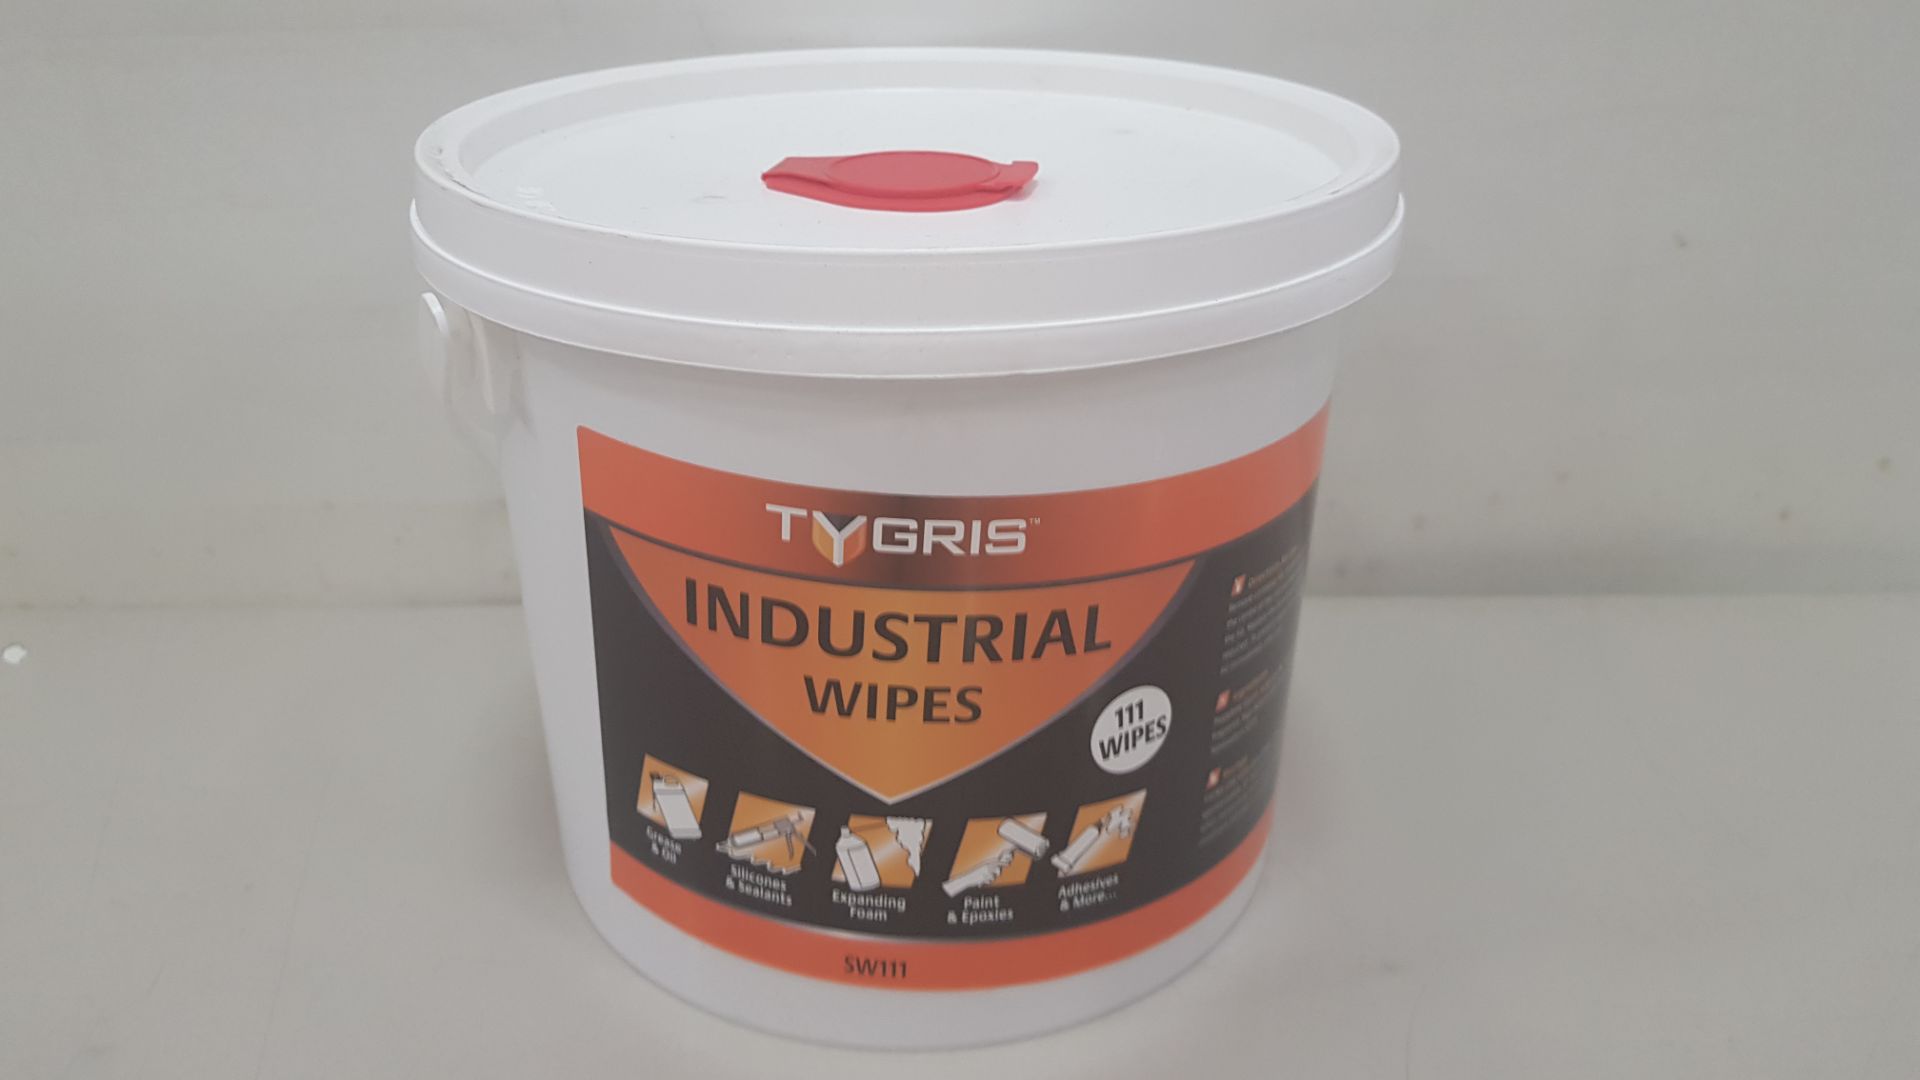 20 X TUBS TYGRIS INDUSTRIAL WIPES, 111 WIPES IN A SINGLE TUB. (5 BOXES)